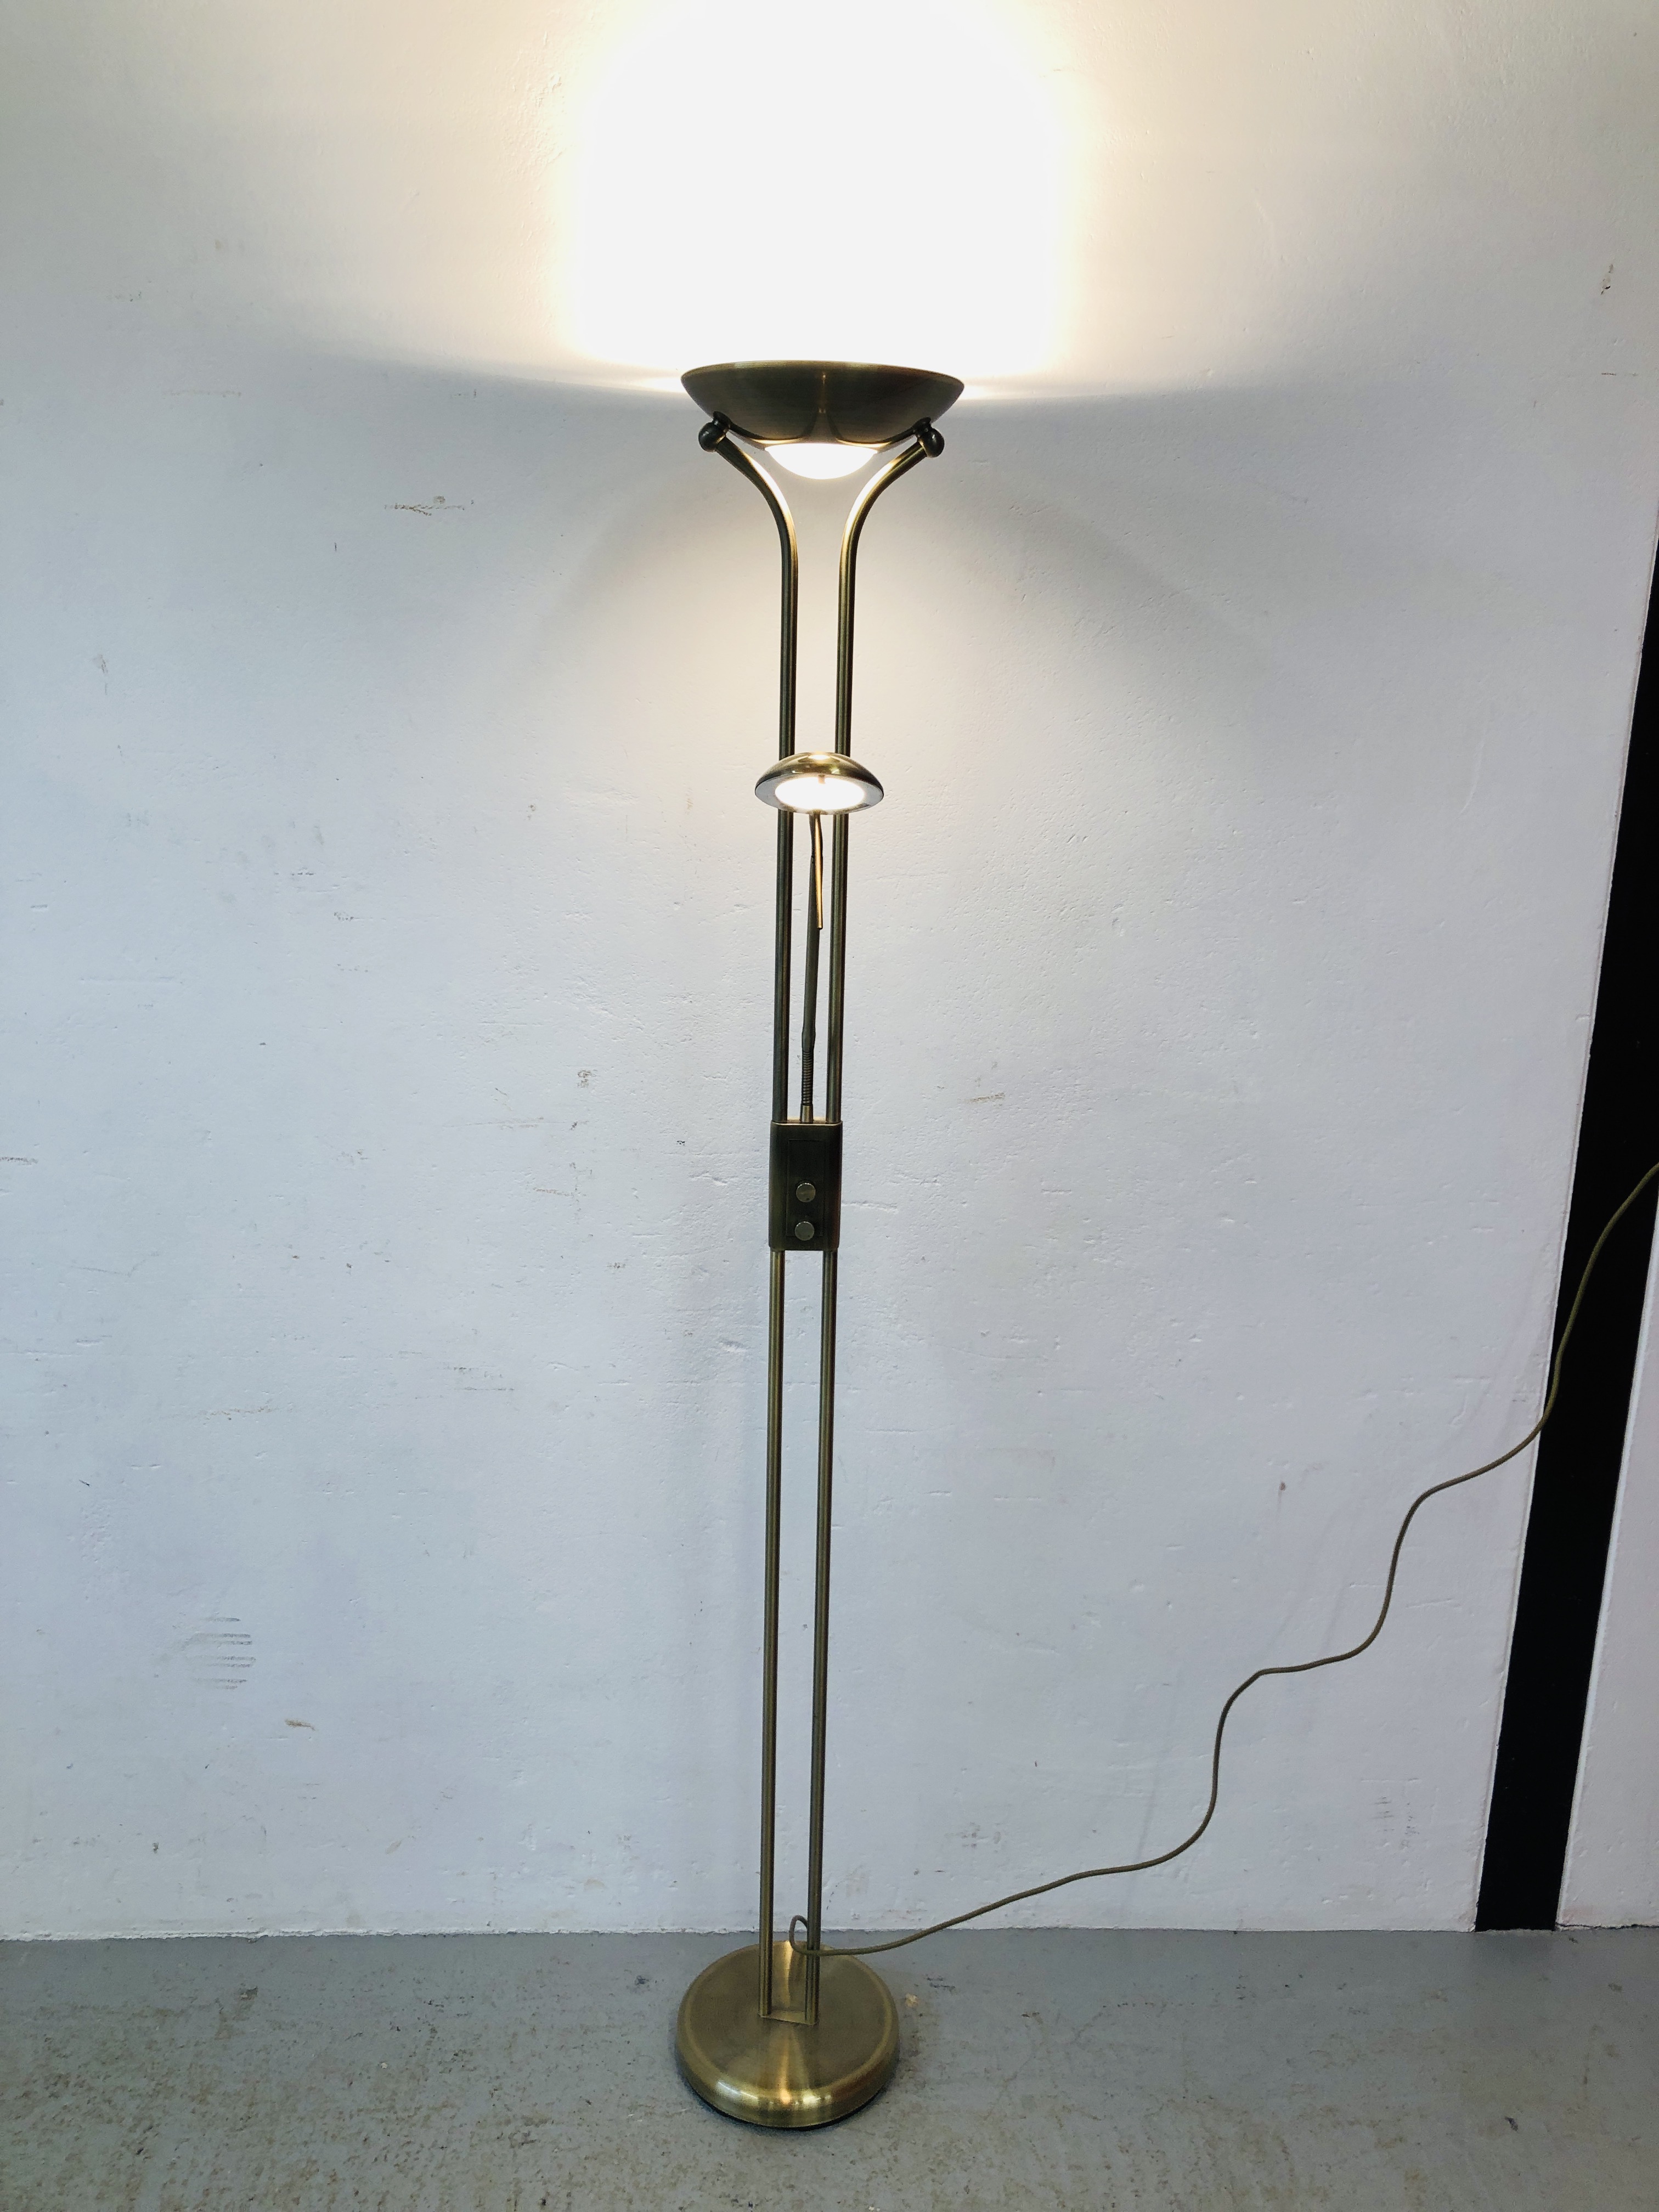 A MODERN BRASS FINISH UPLIGHTER WITH ADJUSTABLE READING LAMP - SOLD AS SEEN